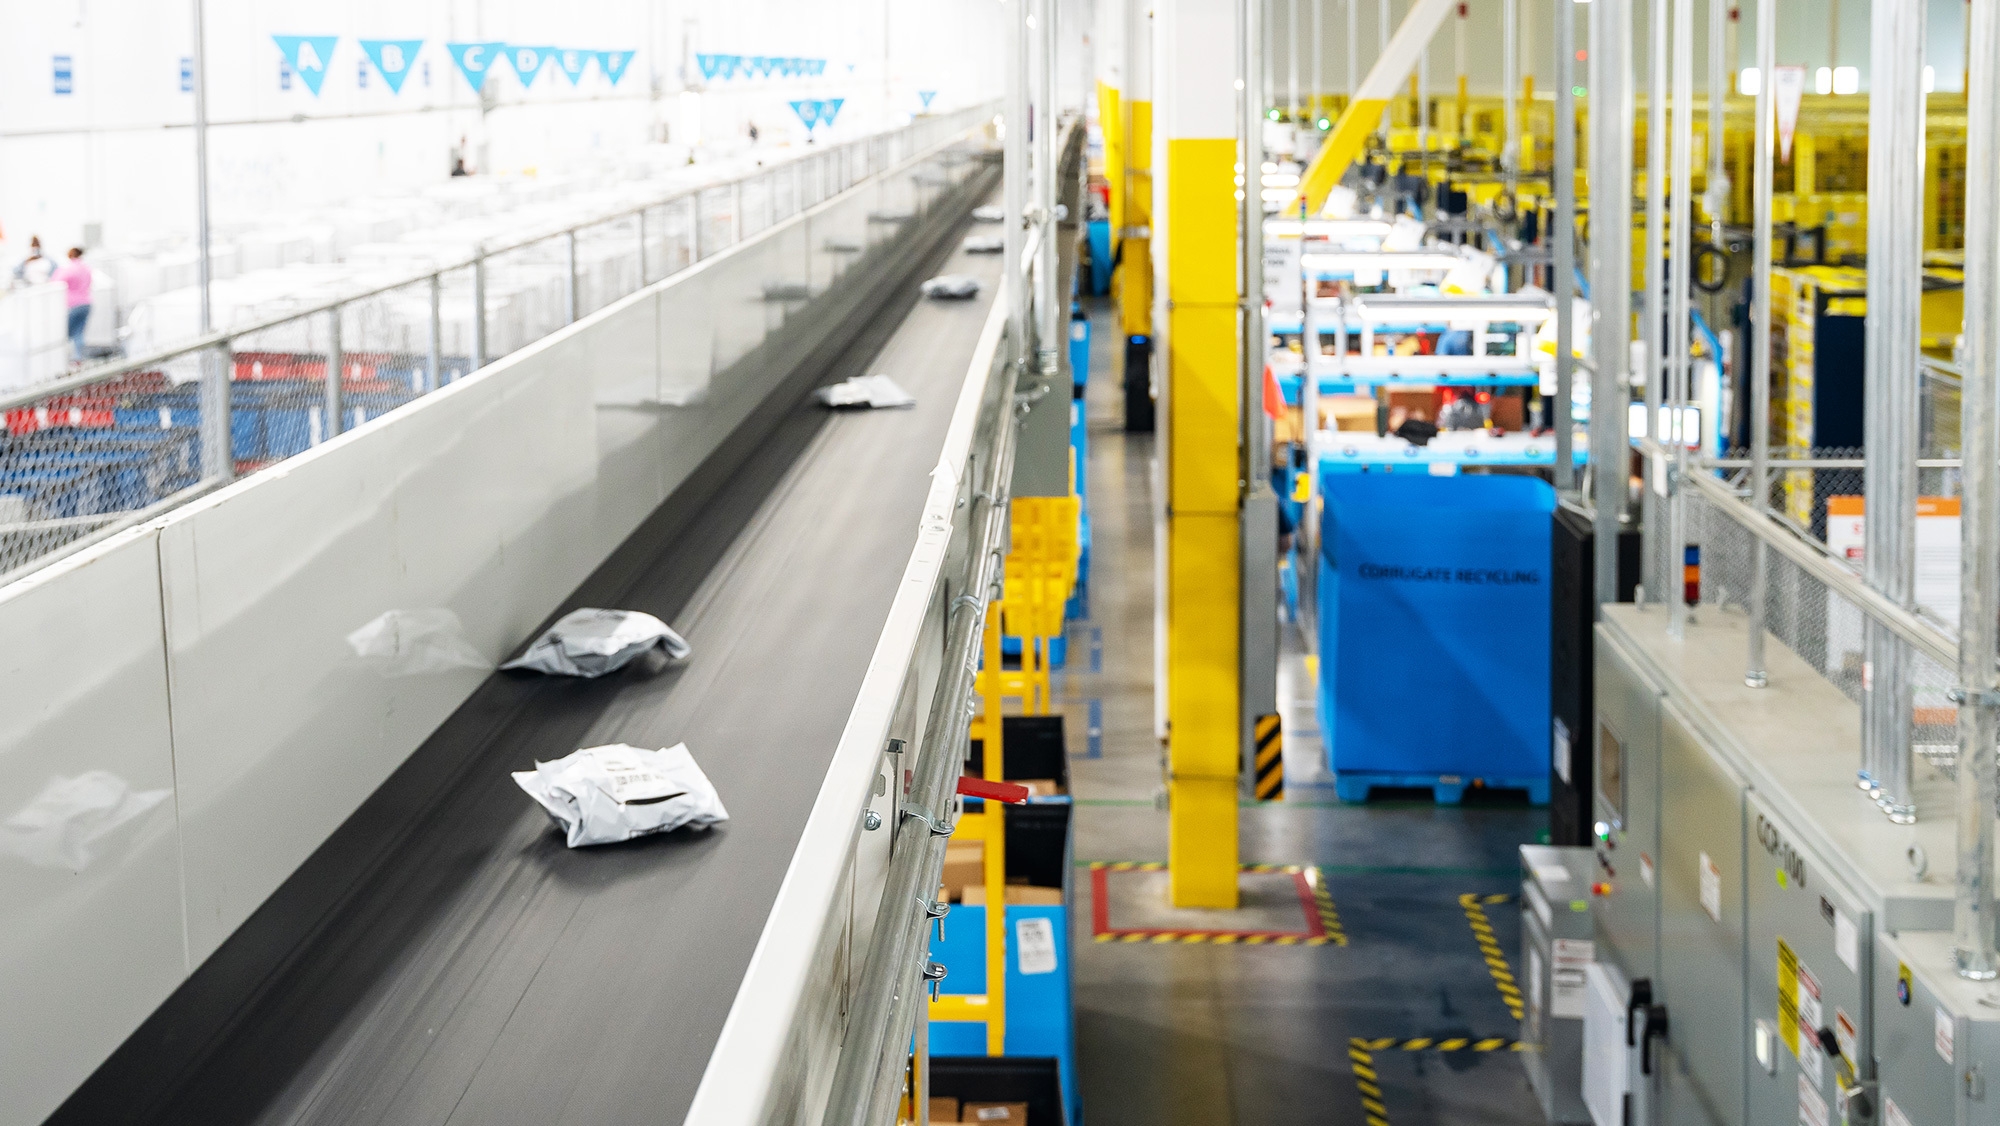 Amazon packages on a conveyor belt in a fulfillment center.